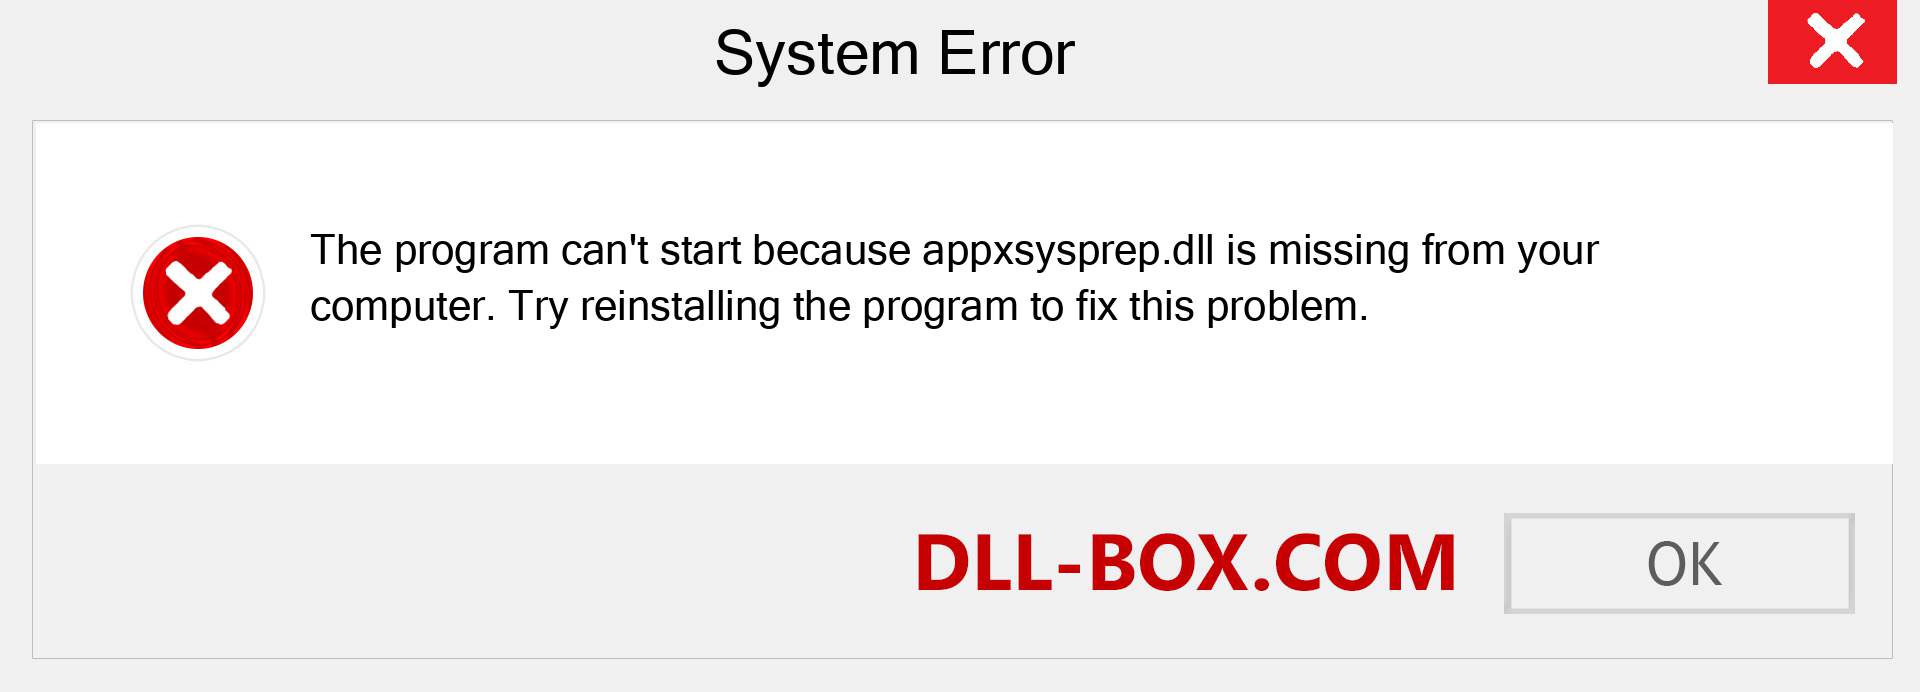  appxsysprep.dll file is missing?. Download for Windows 7, 8, 10 - Fix  appxsysprep dll Missing Error on Windows, photos, images